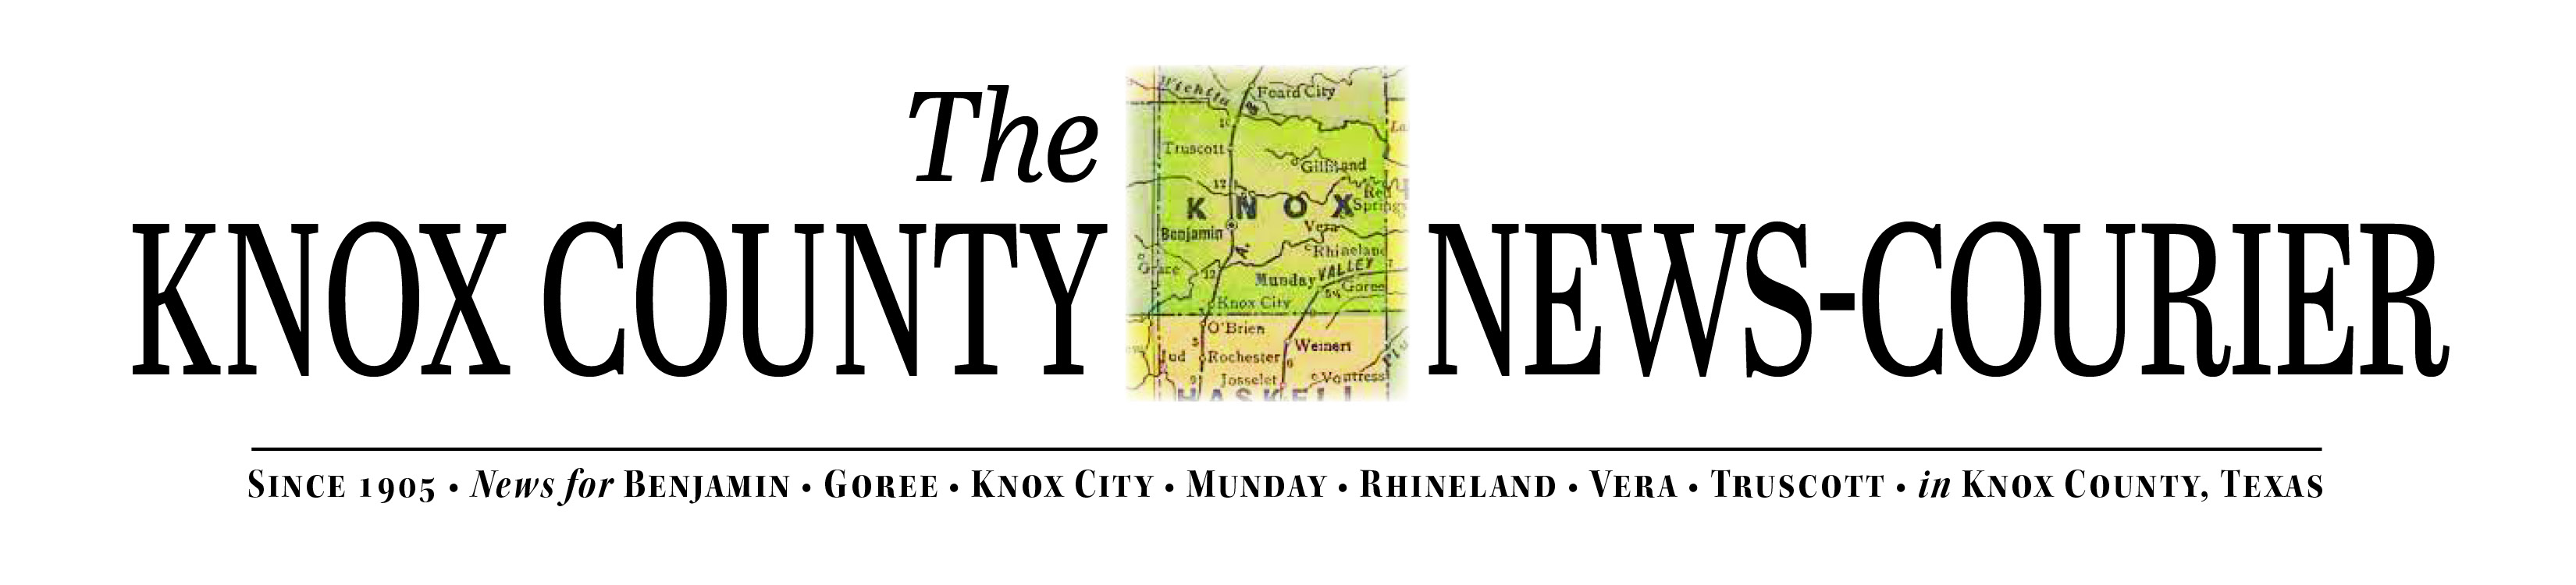 Knox County News-Courier Home